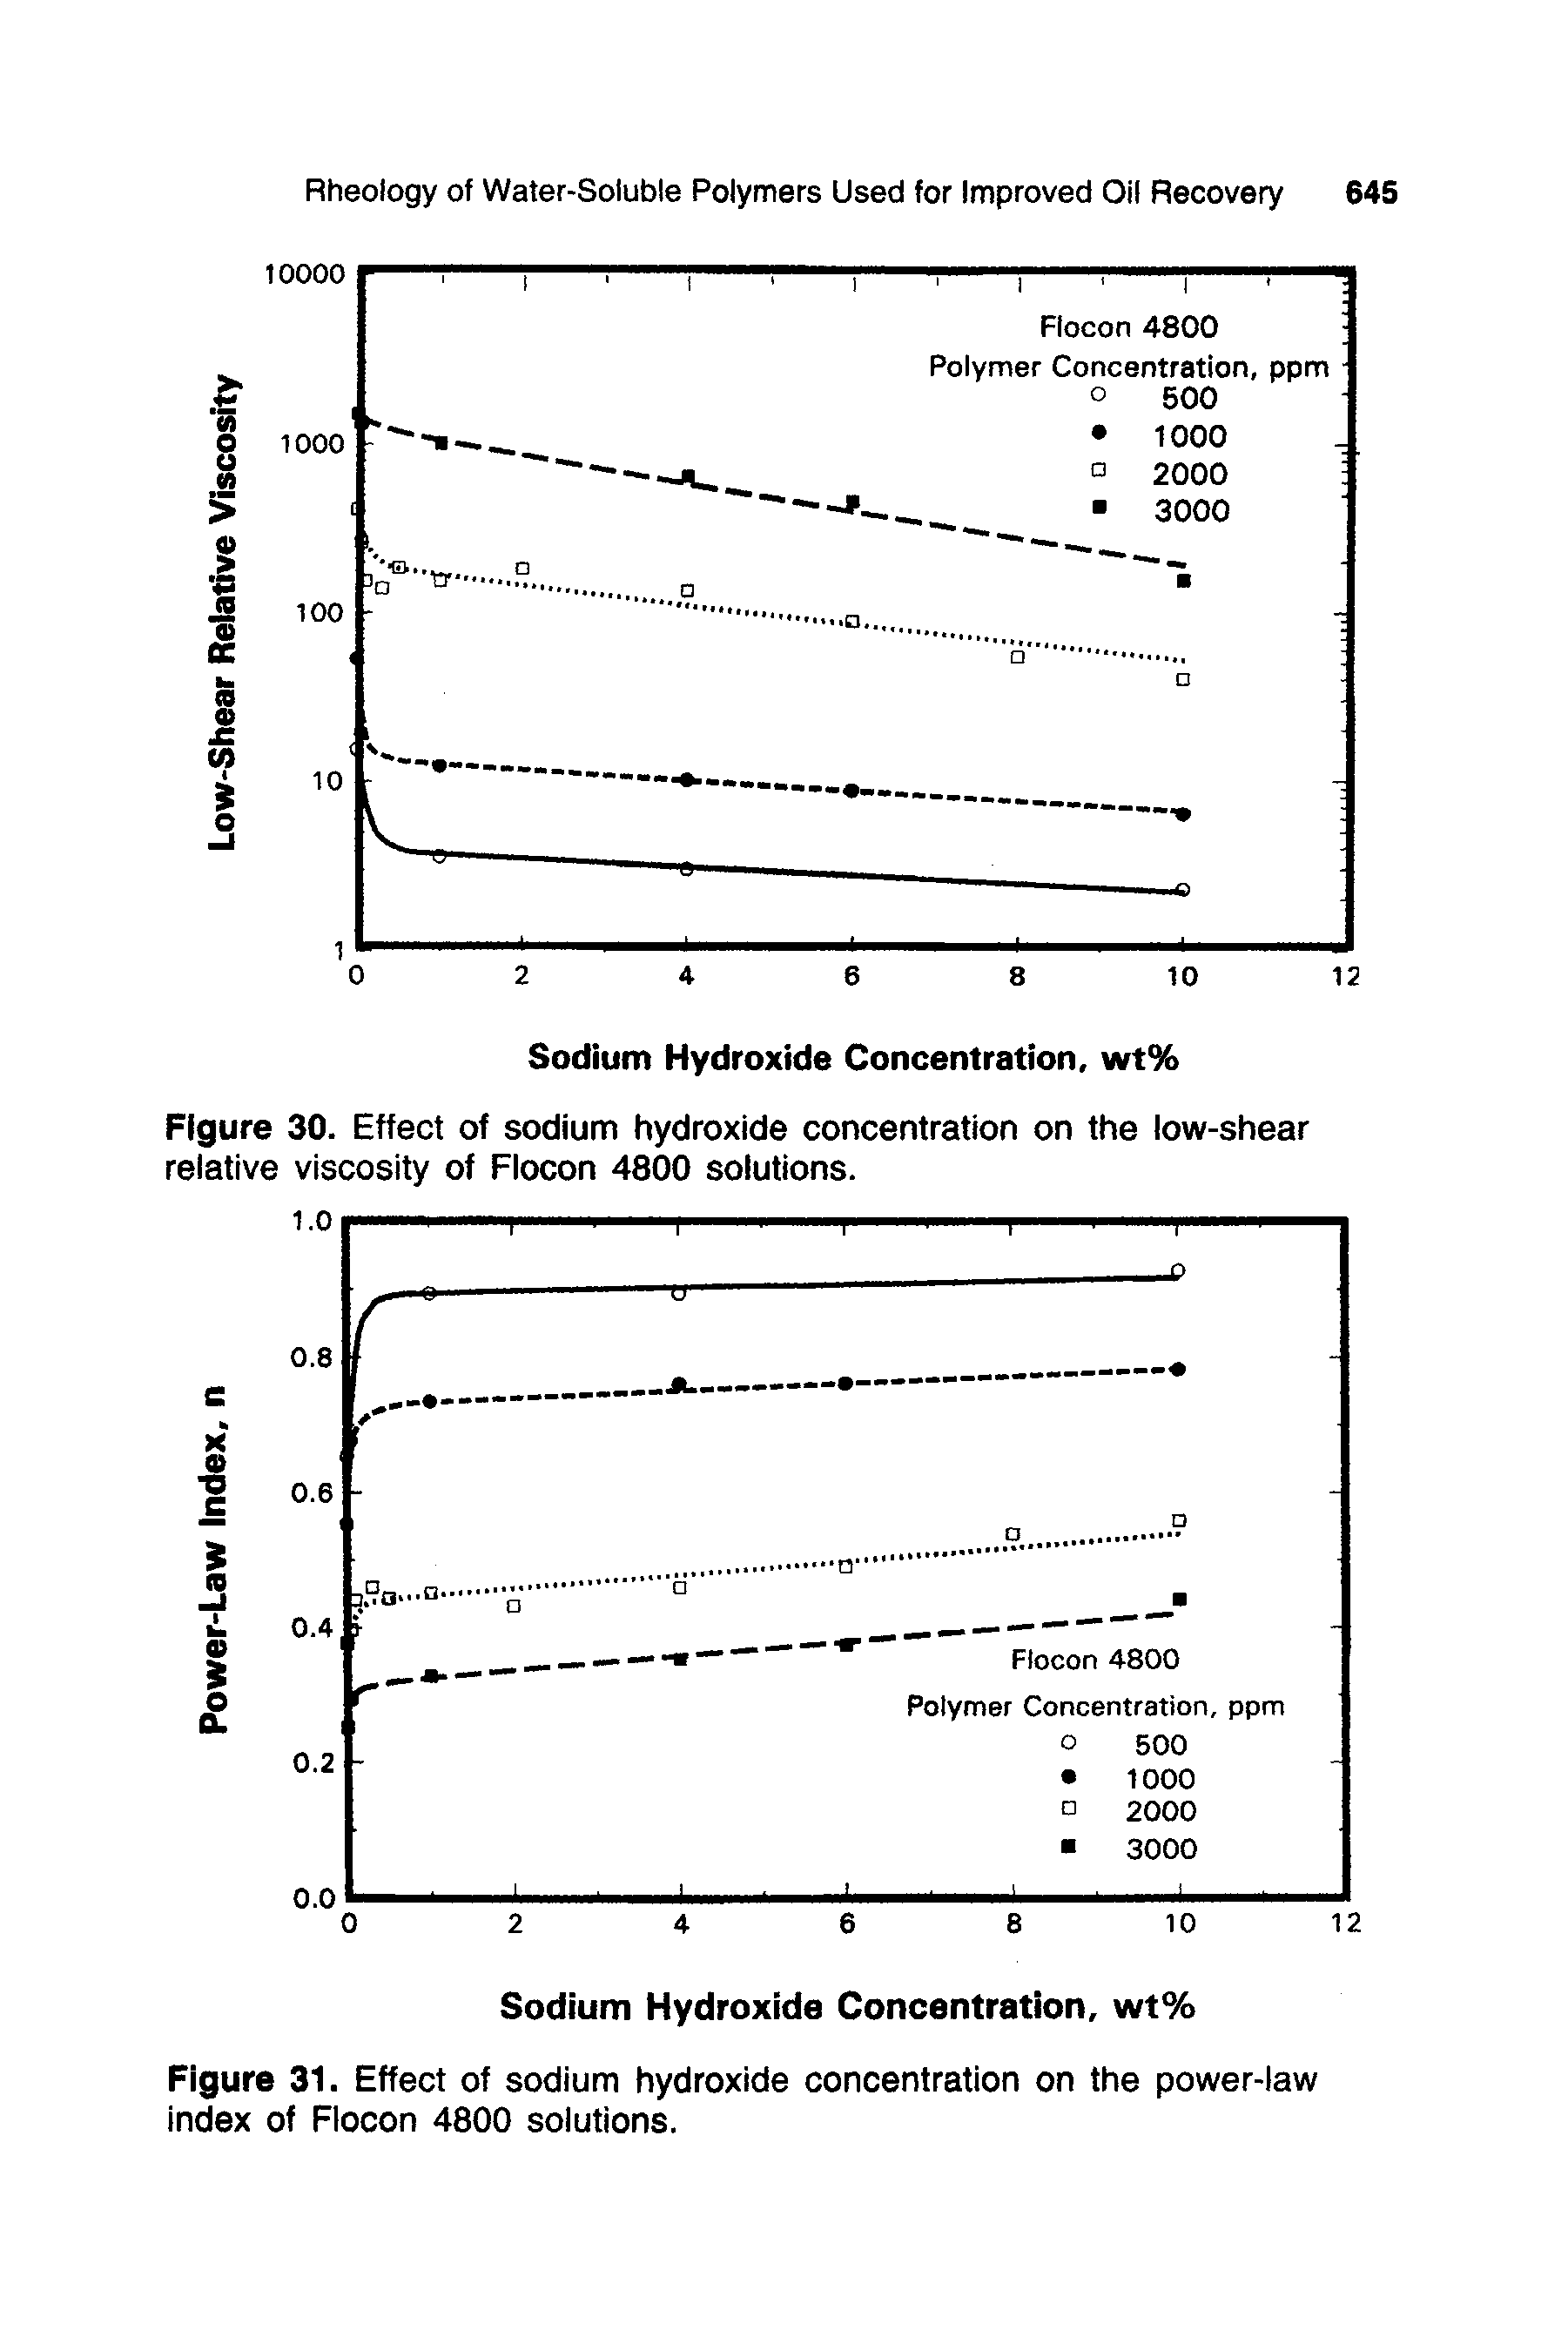 Figure 31. Effect of sodium hydroxide concentration on the power-law index of Flocon 4800 solutions.